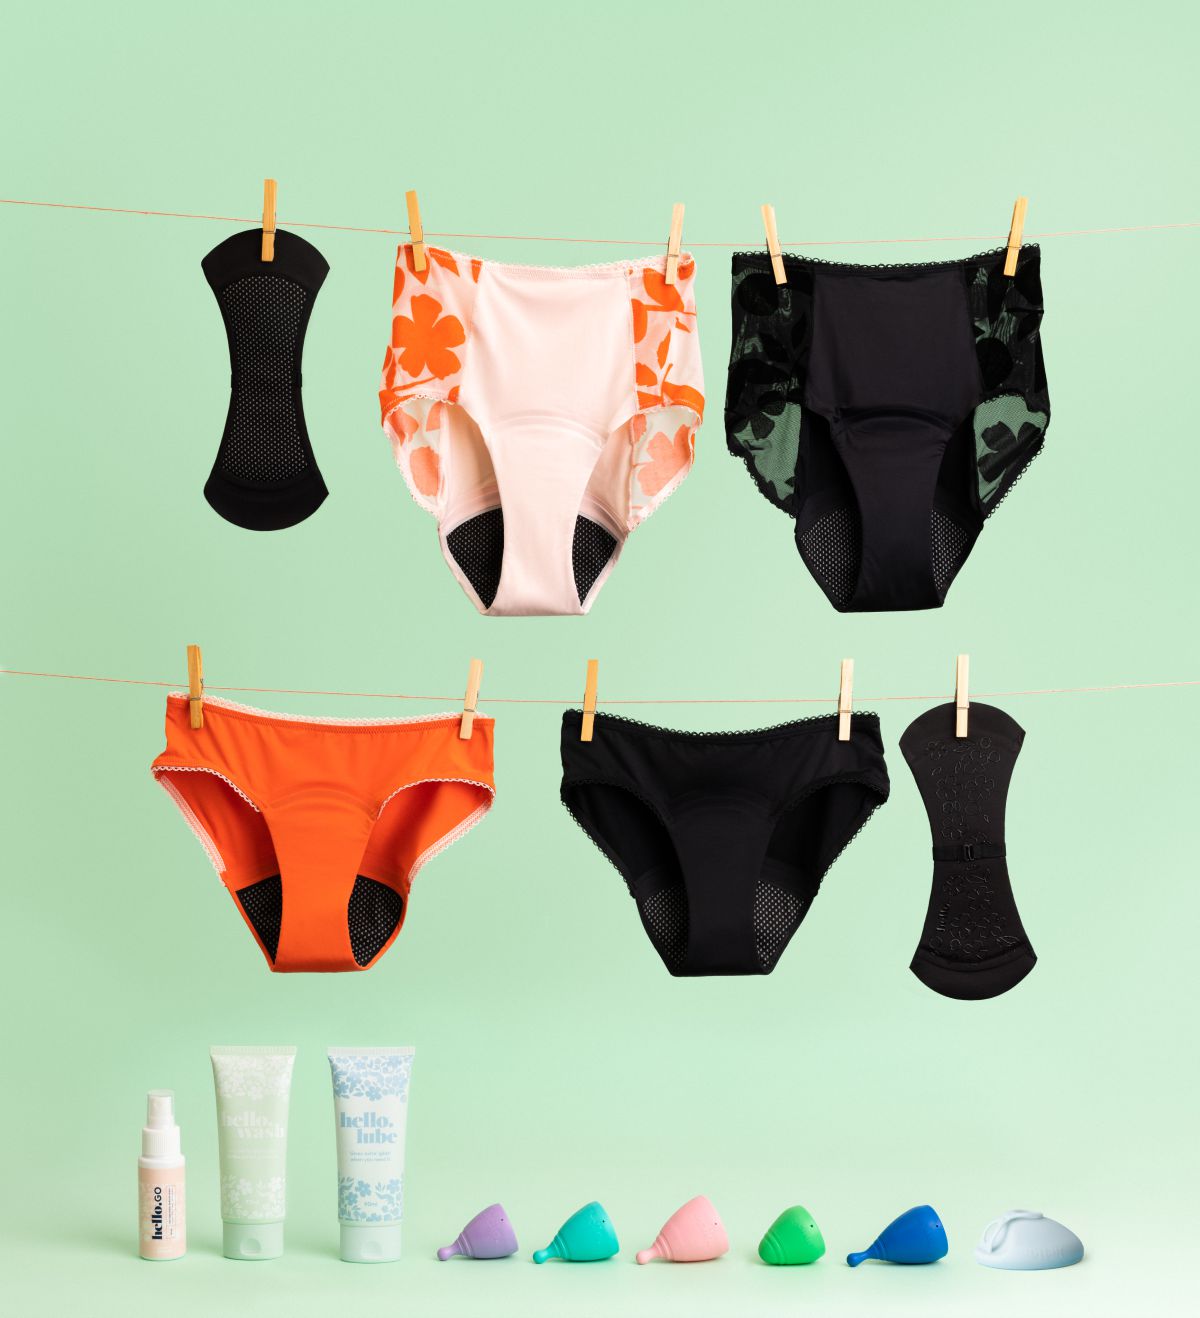 Types of Period Products: What are the Best Options for You?